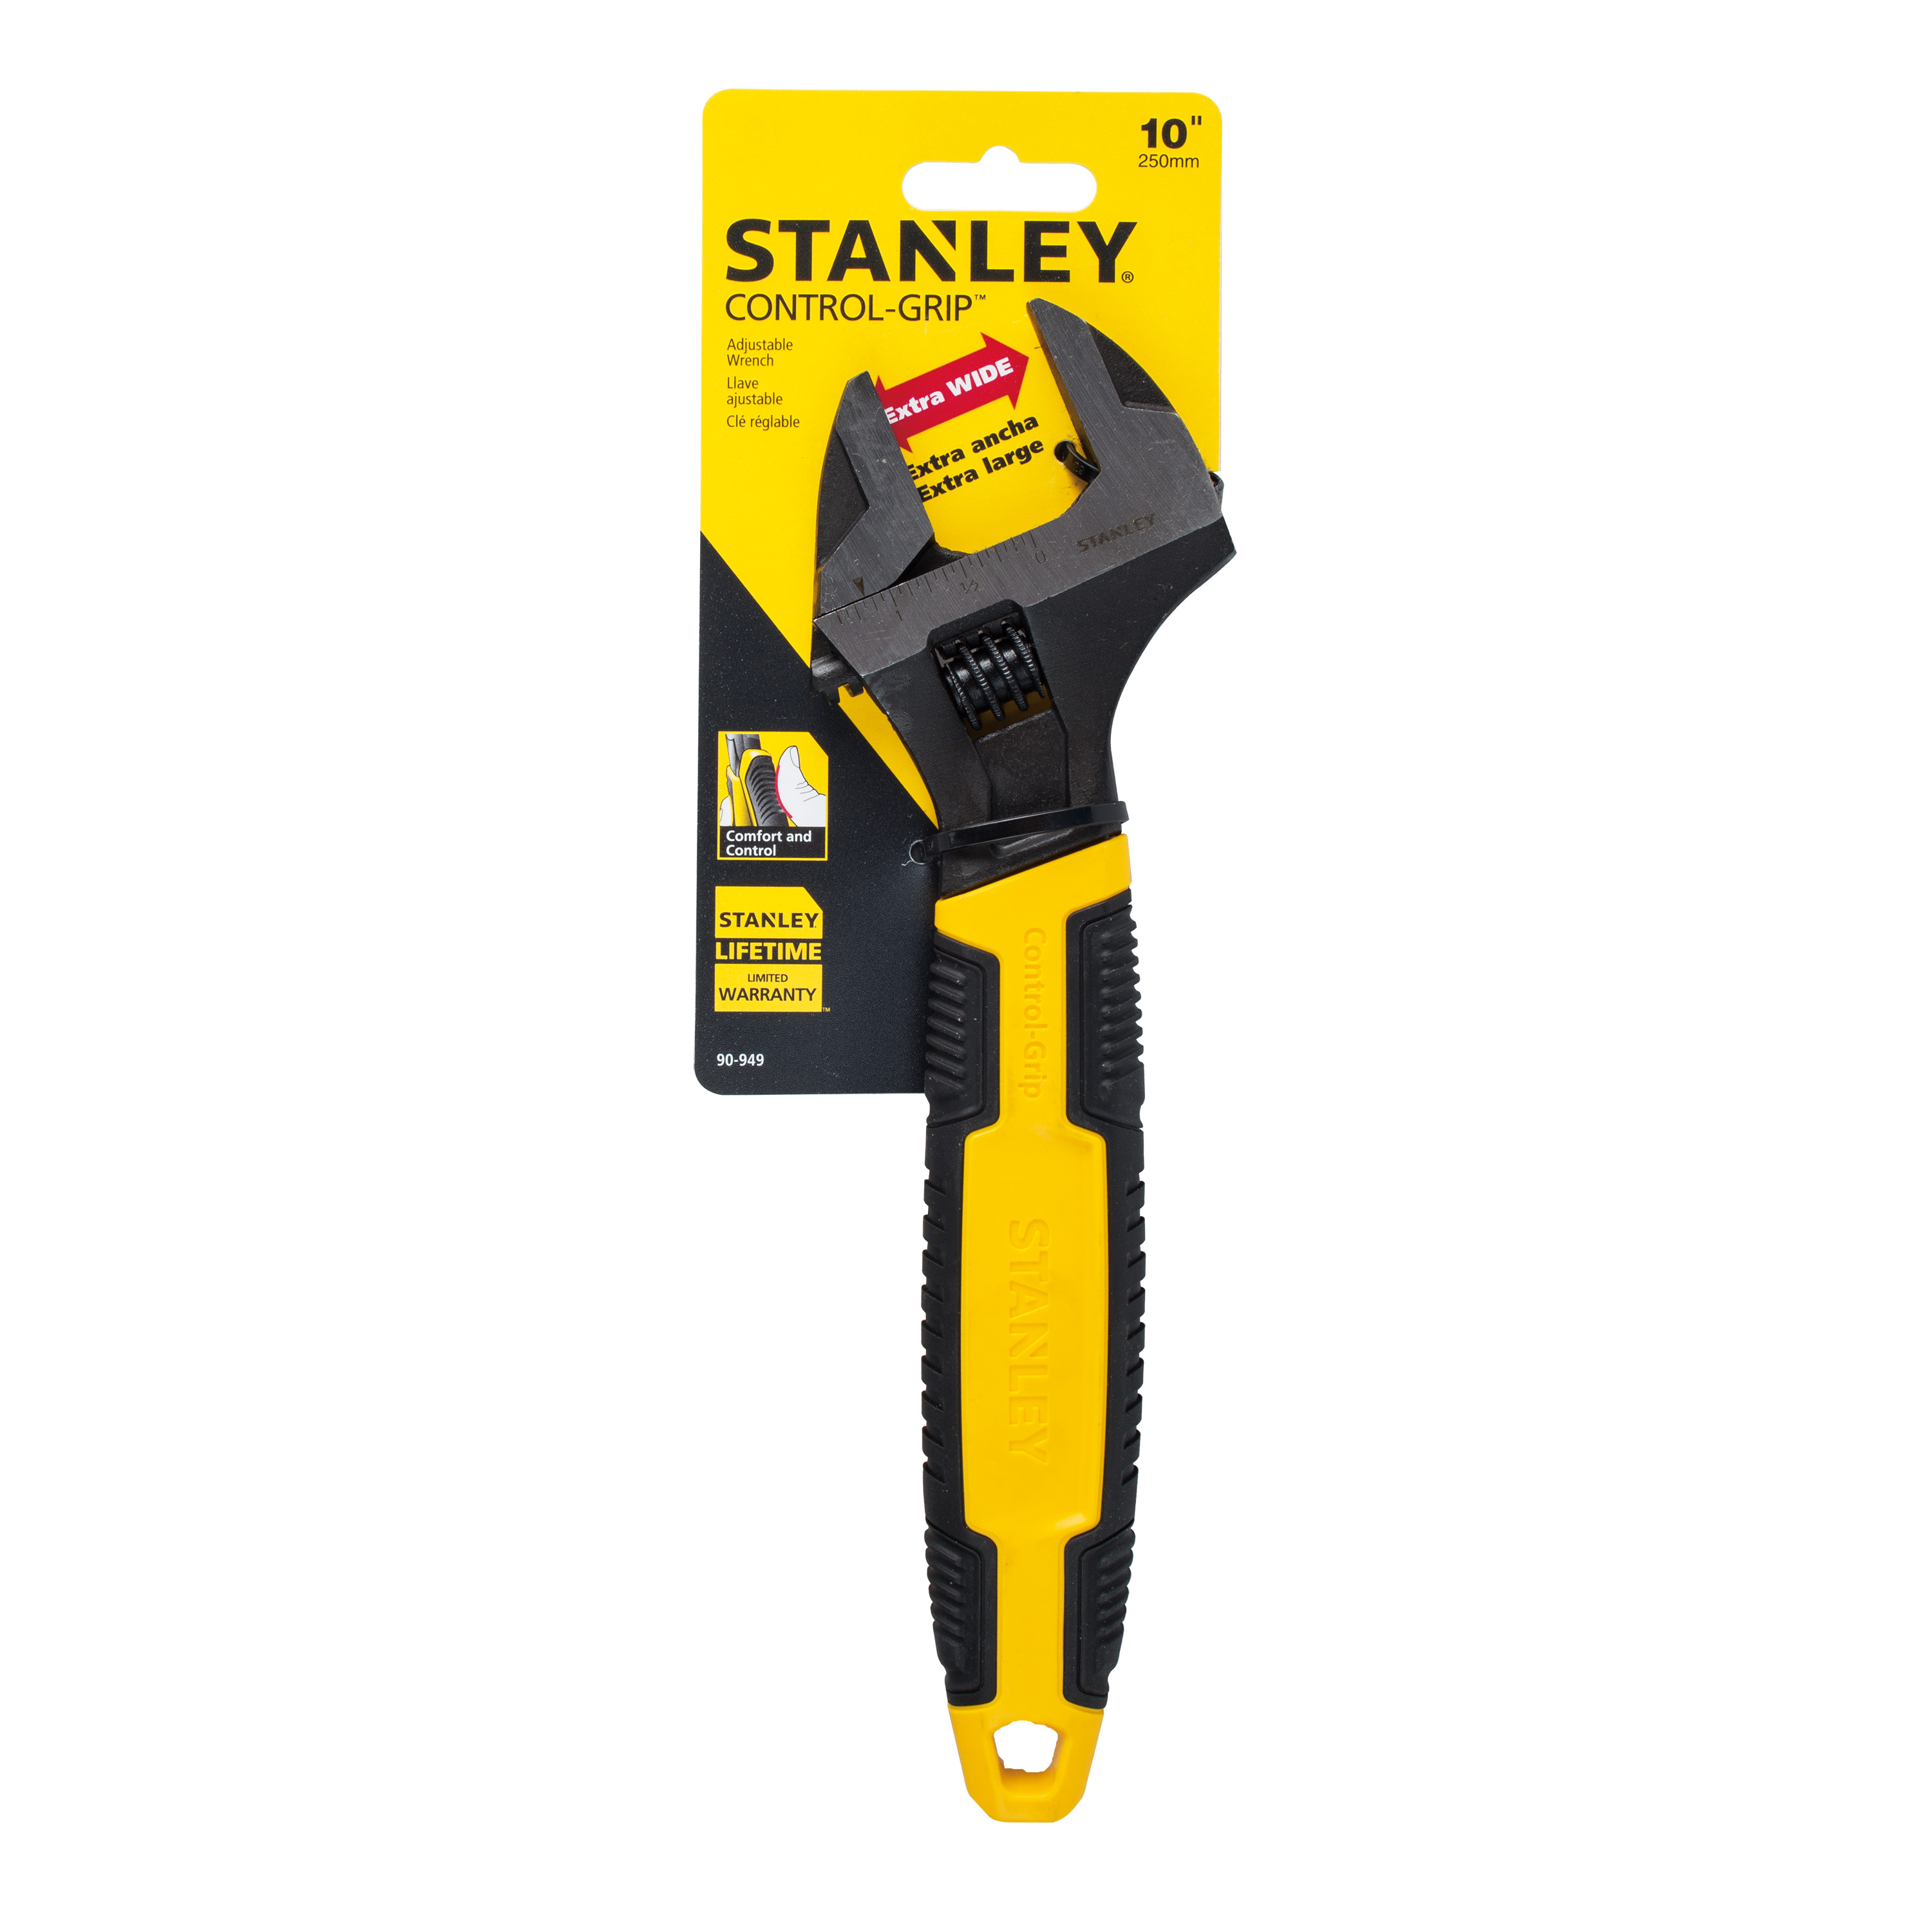 STANLEY 90-949 10-Inch Adjustable Wrench - image 1 of 2